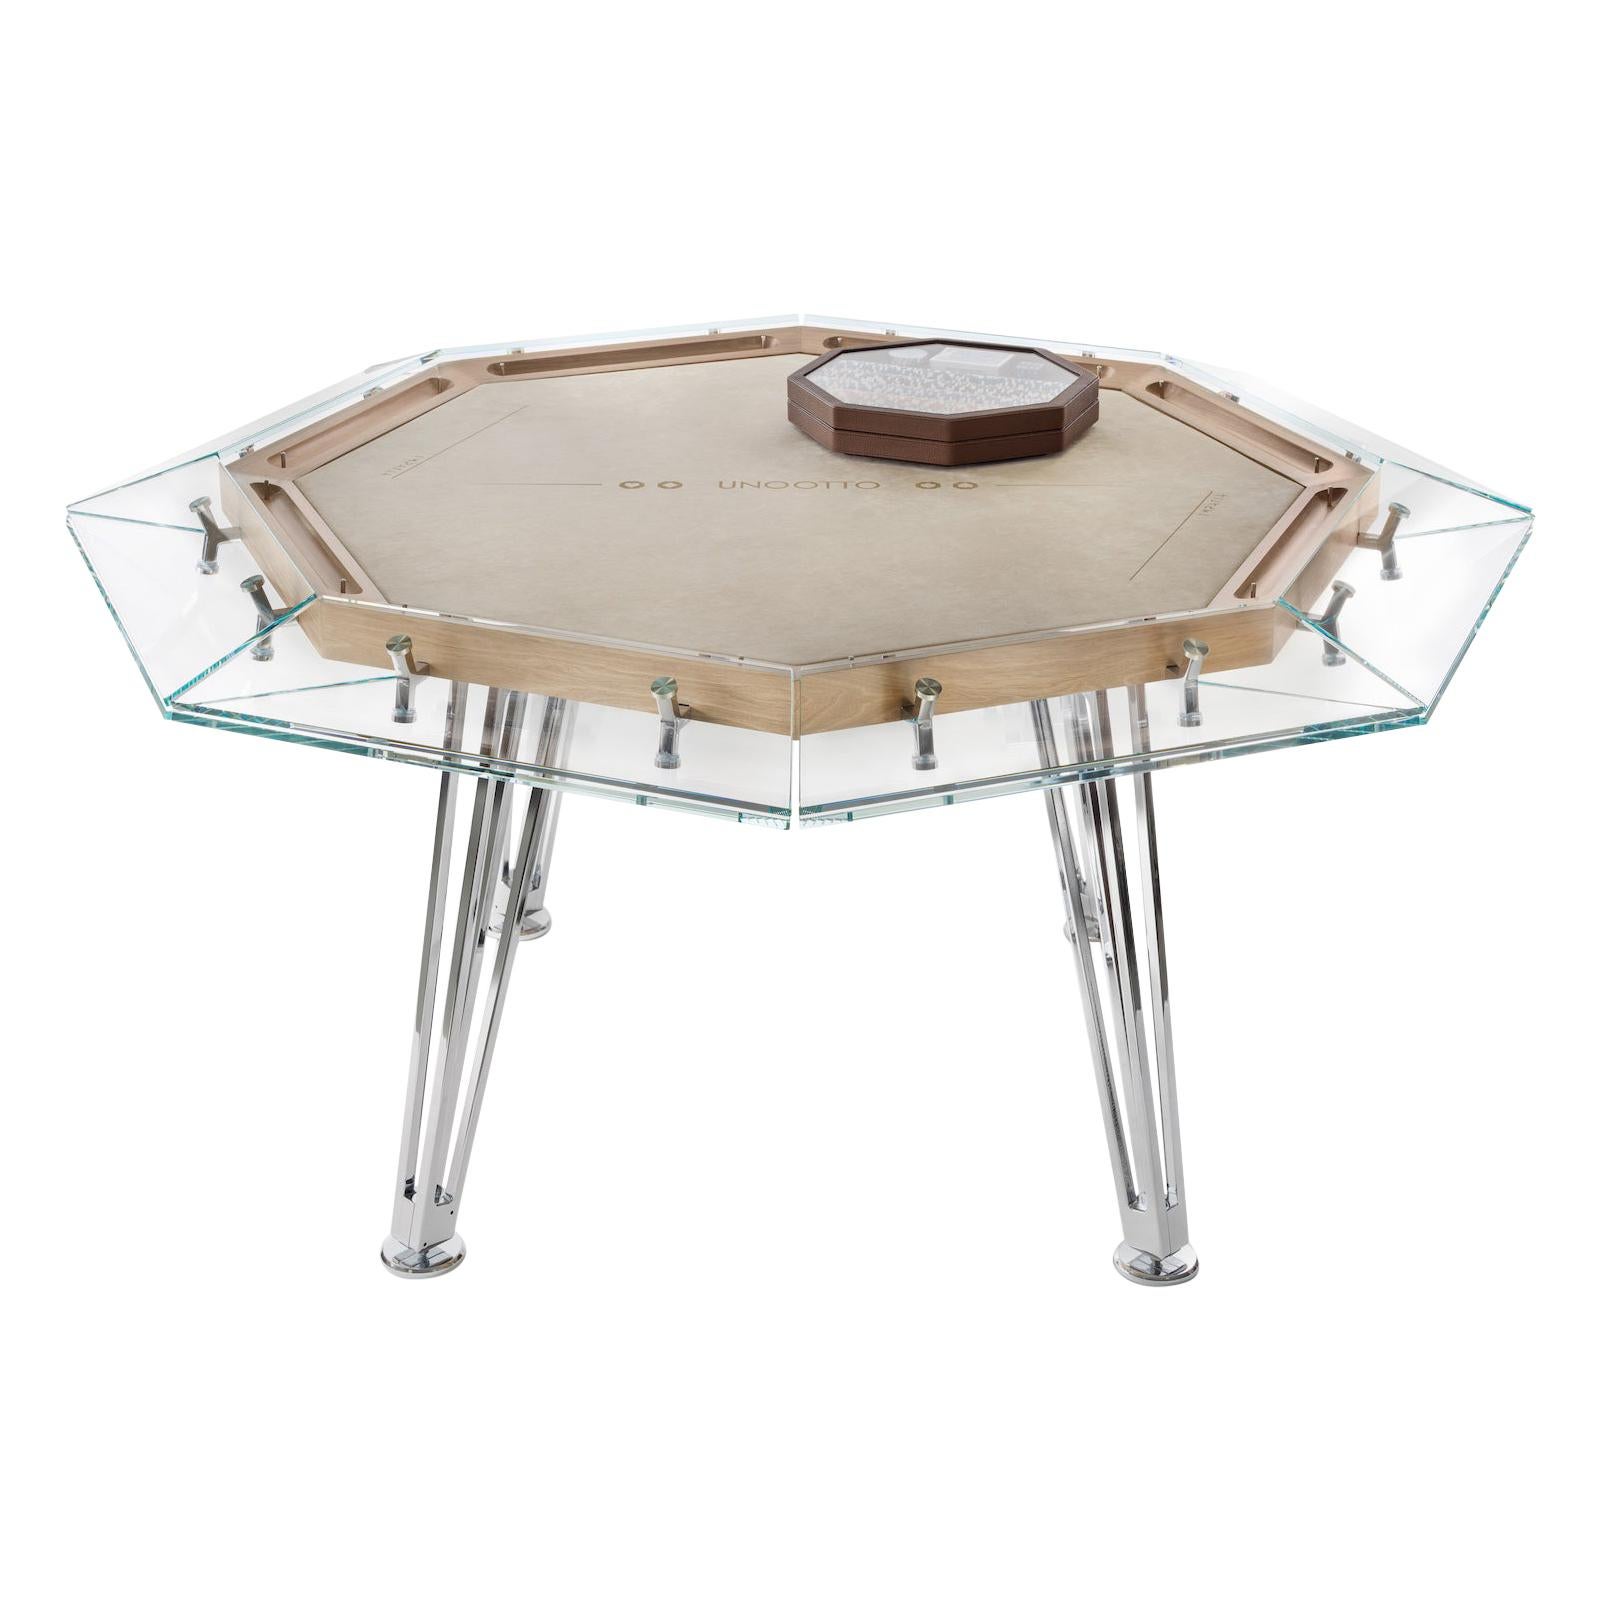 Unootto Wood, 8 Players, Contemporary Design Poker Table by Impatia